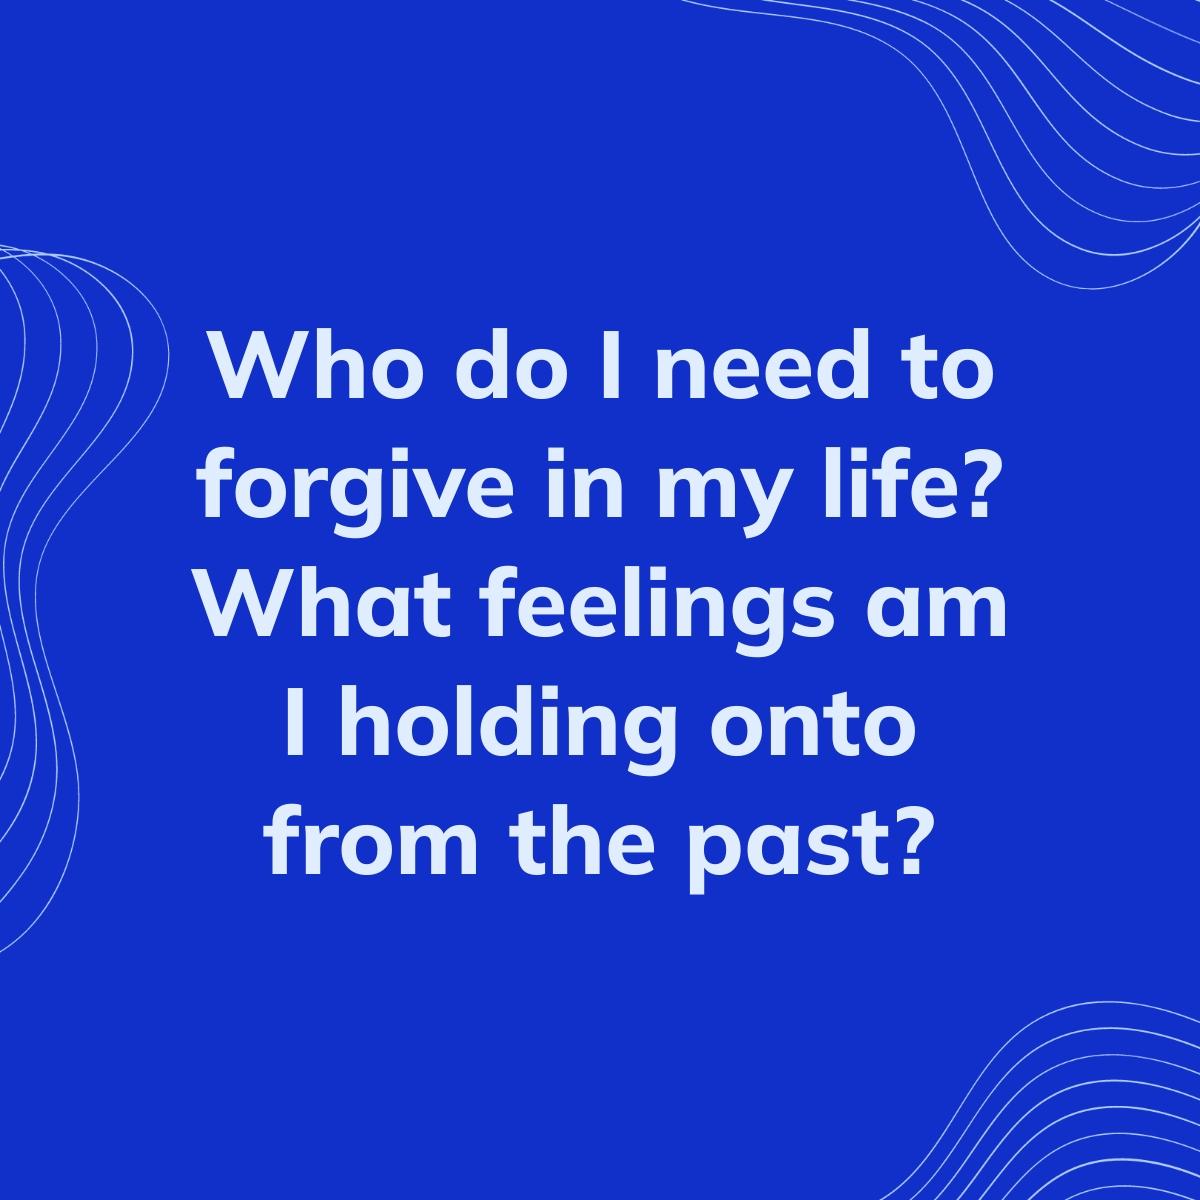 Journal Prompt: Who do I need to forgive in my life? What feelings am I holding onto from the past?